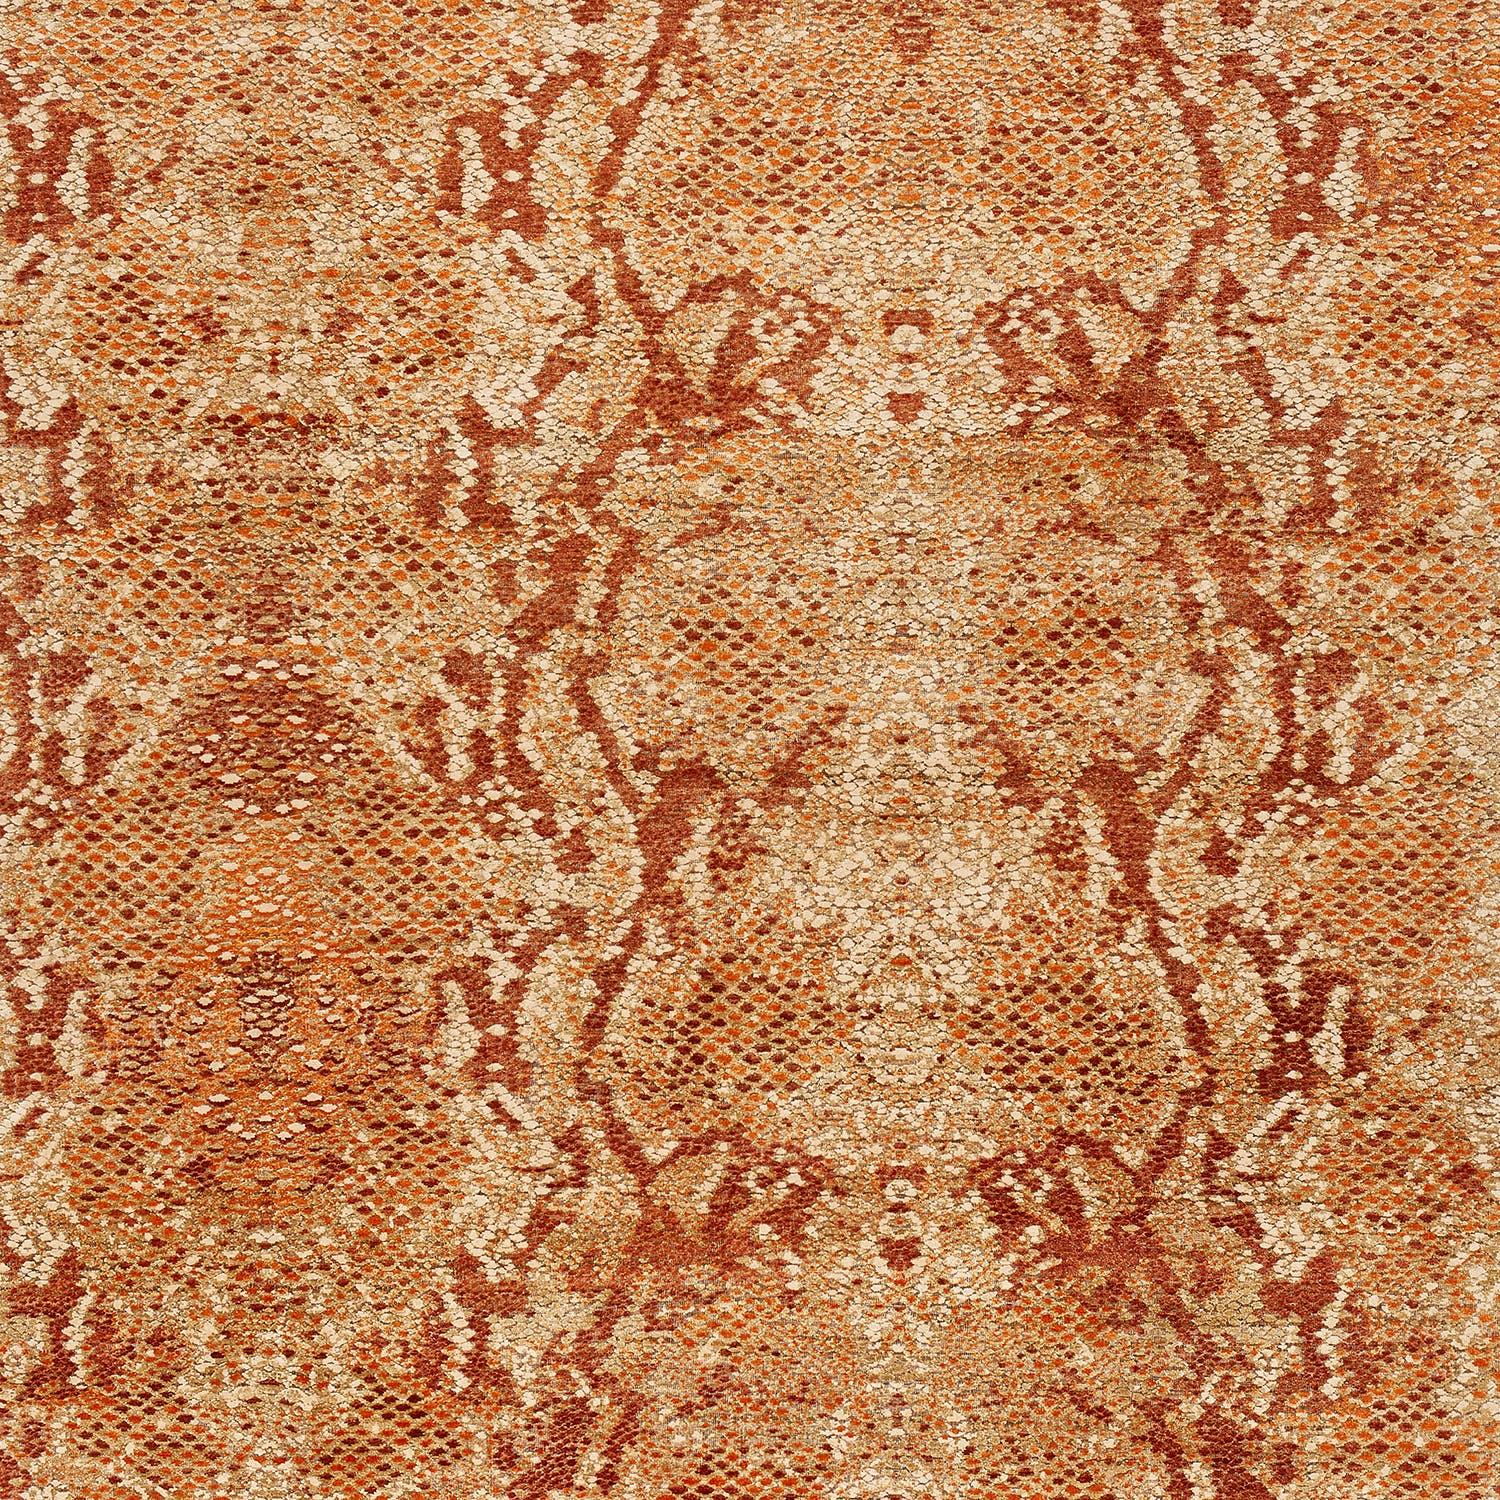 Abstract, organic pattern with warm earthy tones resemblant of animal prints.